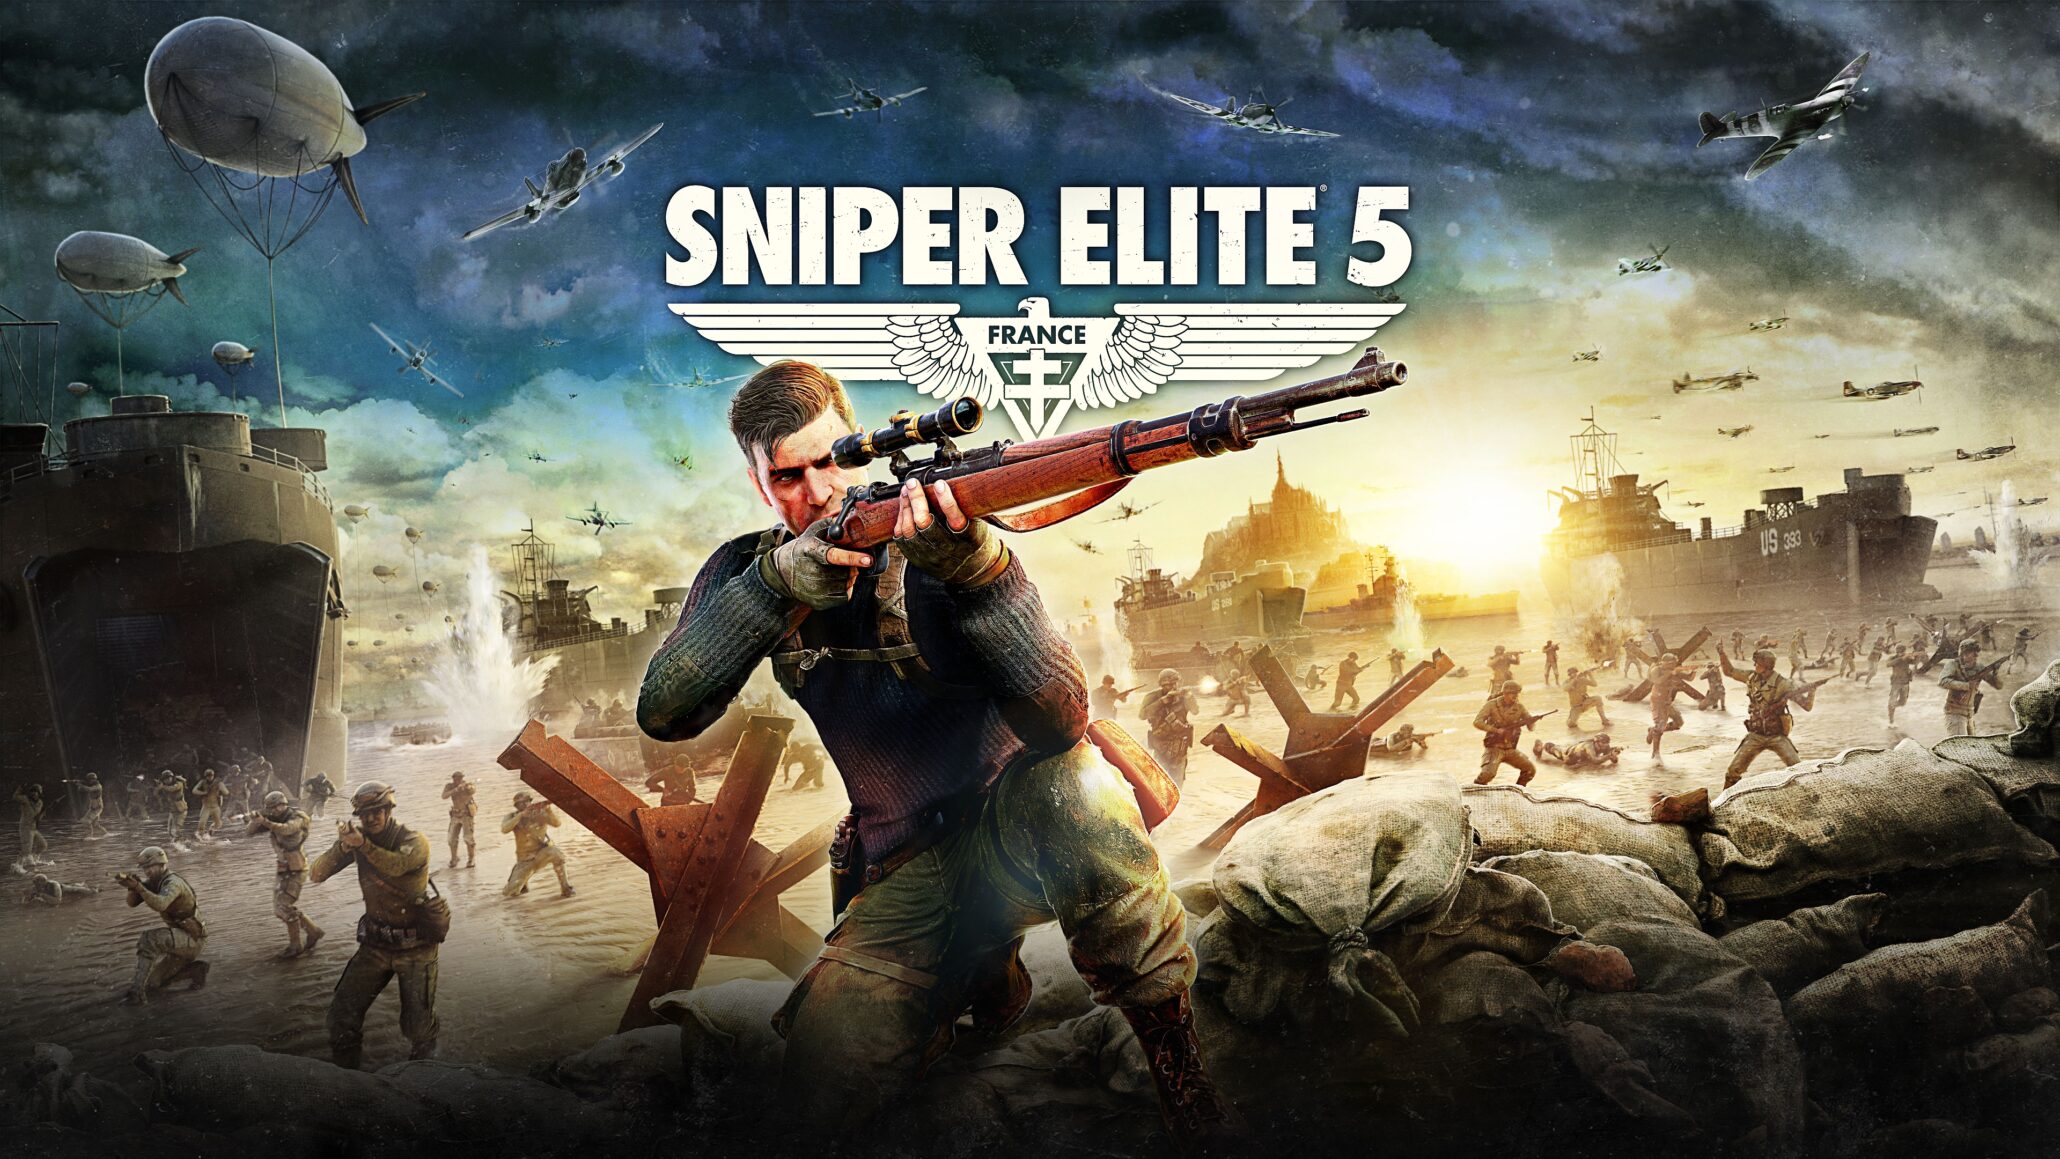 How to Build a Gaming PC for Sniper Elite 5